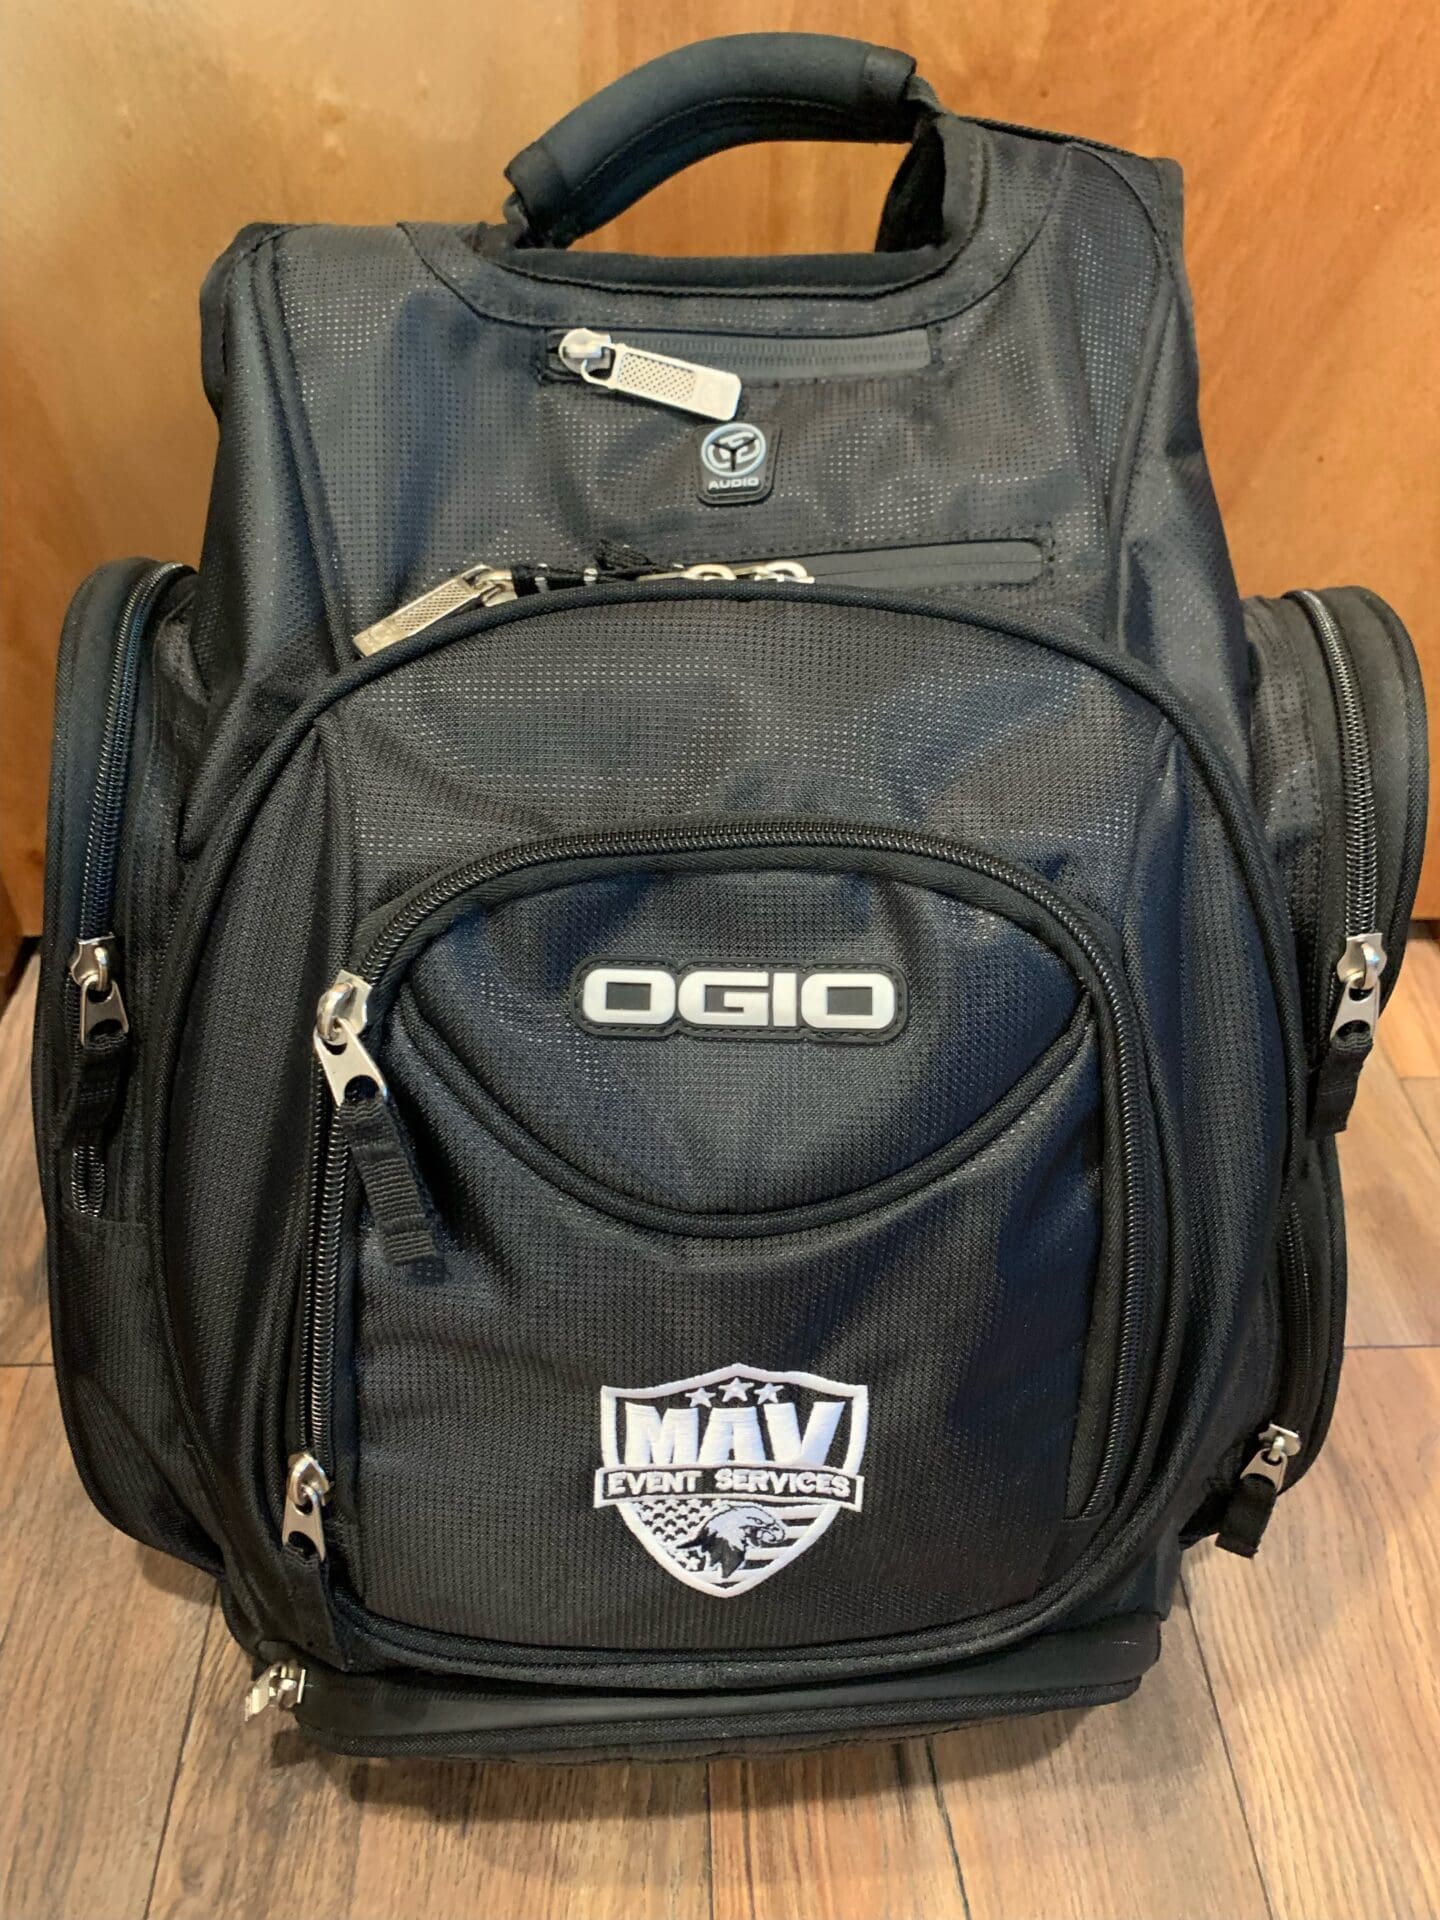 A black backpack with an ogio logo on it.